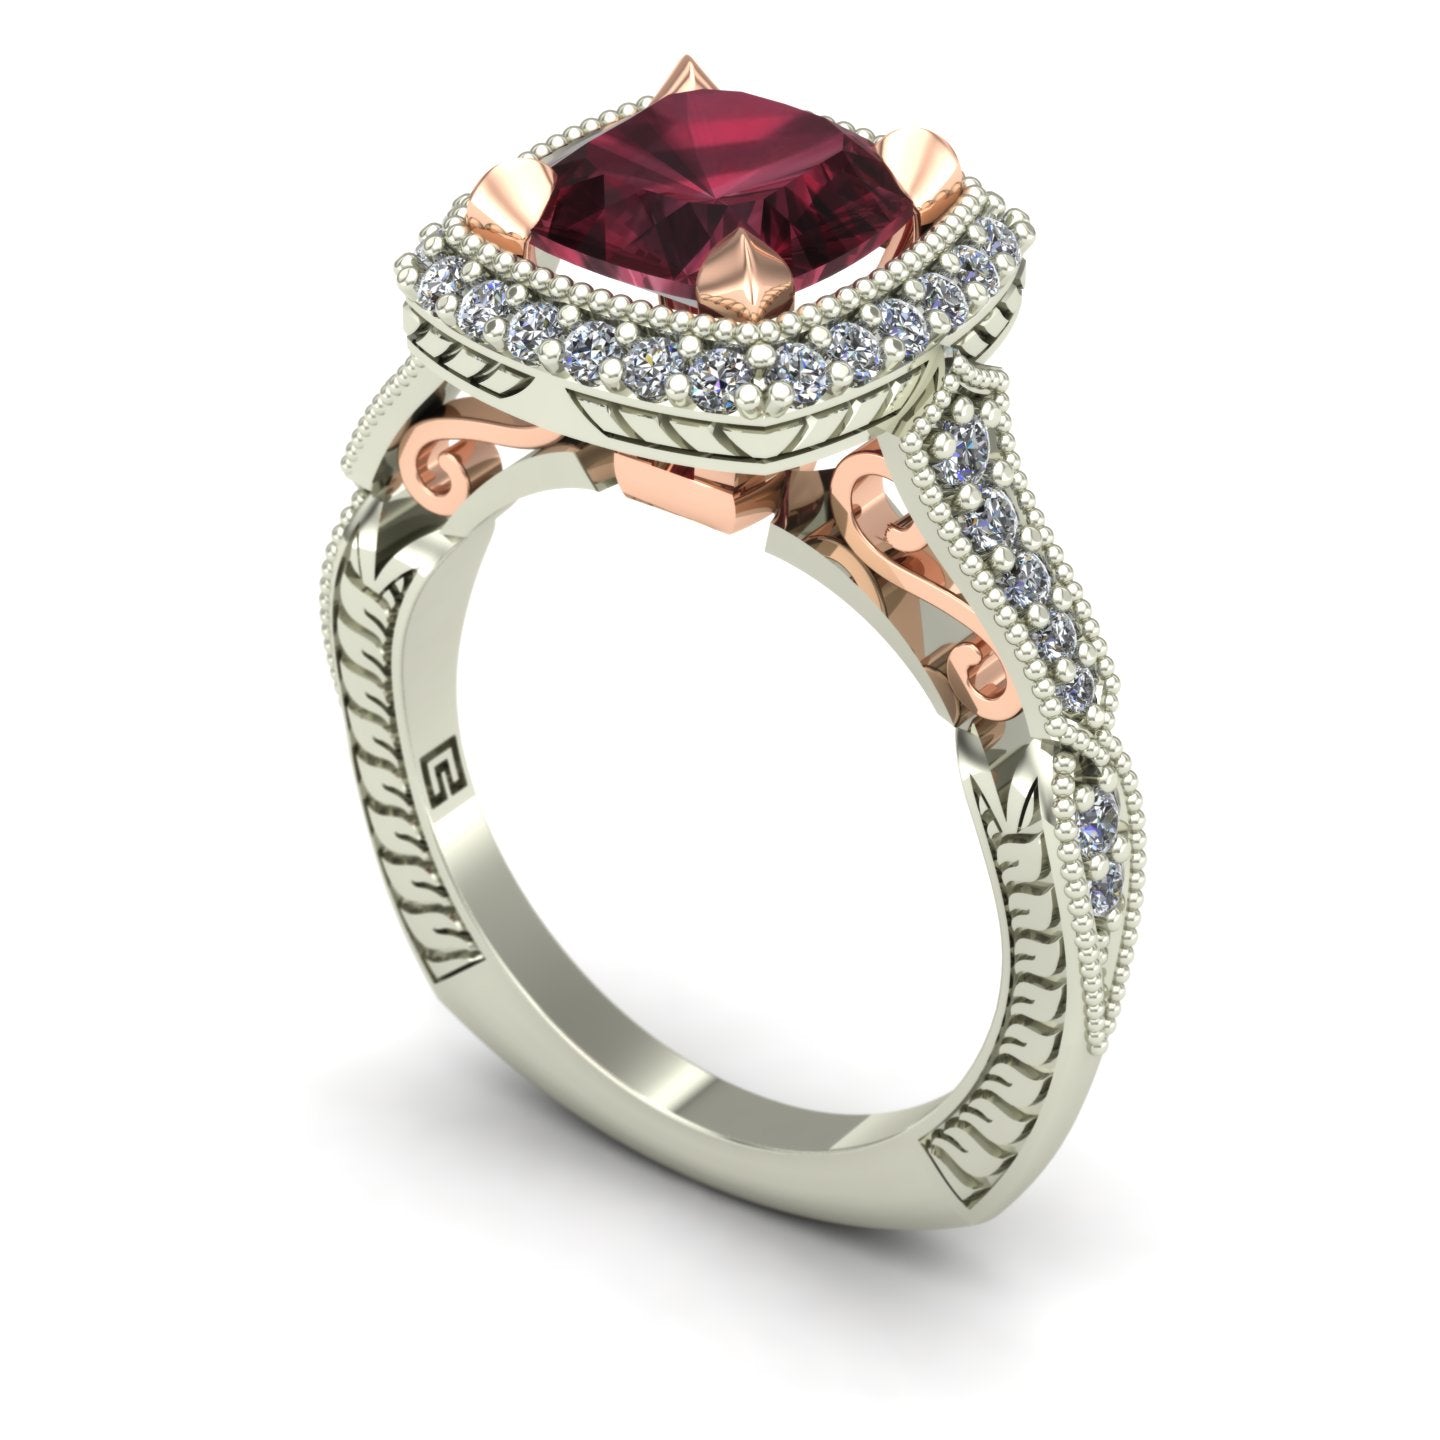 cushion cut rhodolite garnet and diamond halo two tone scroll ring in 14k rose and white gold - Charles Babb Designs